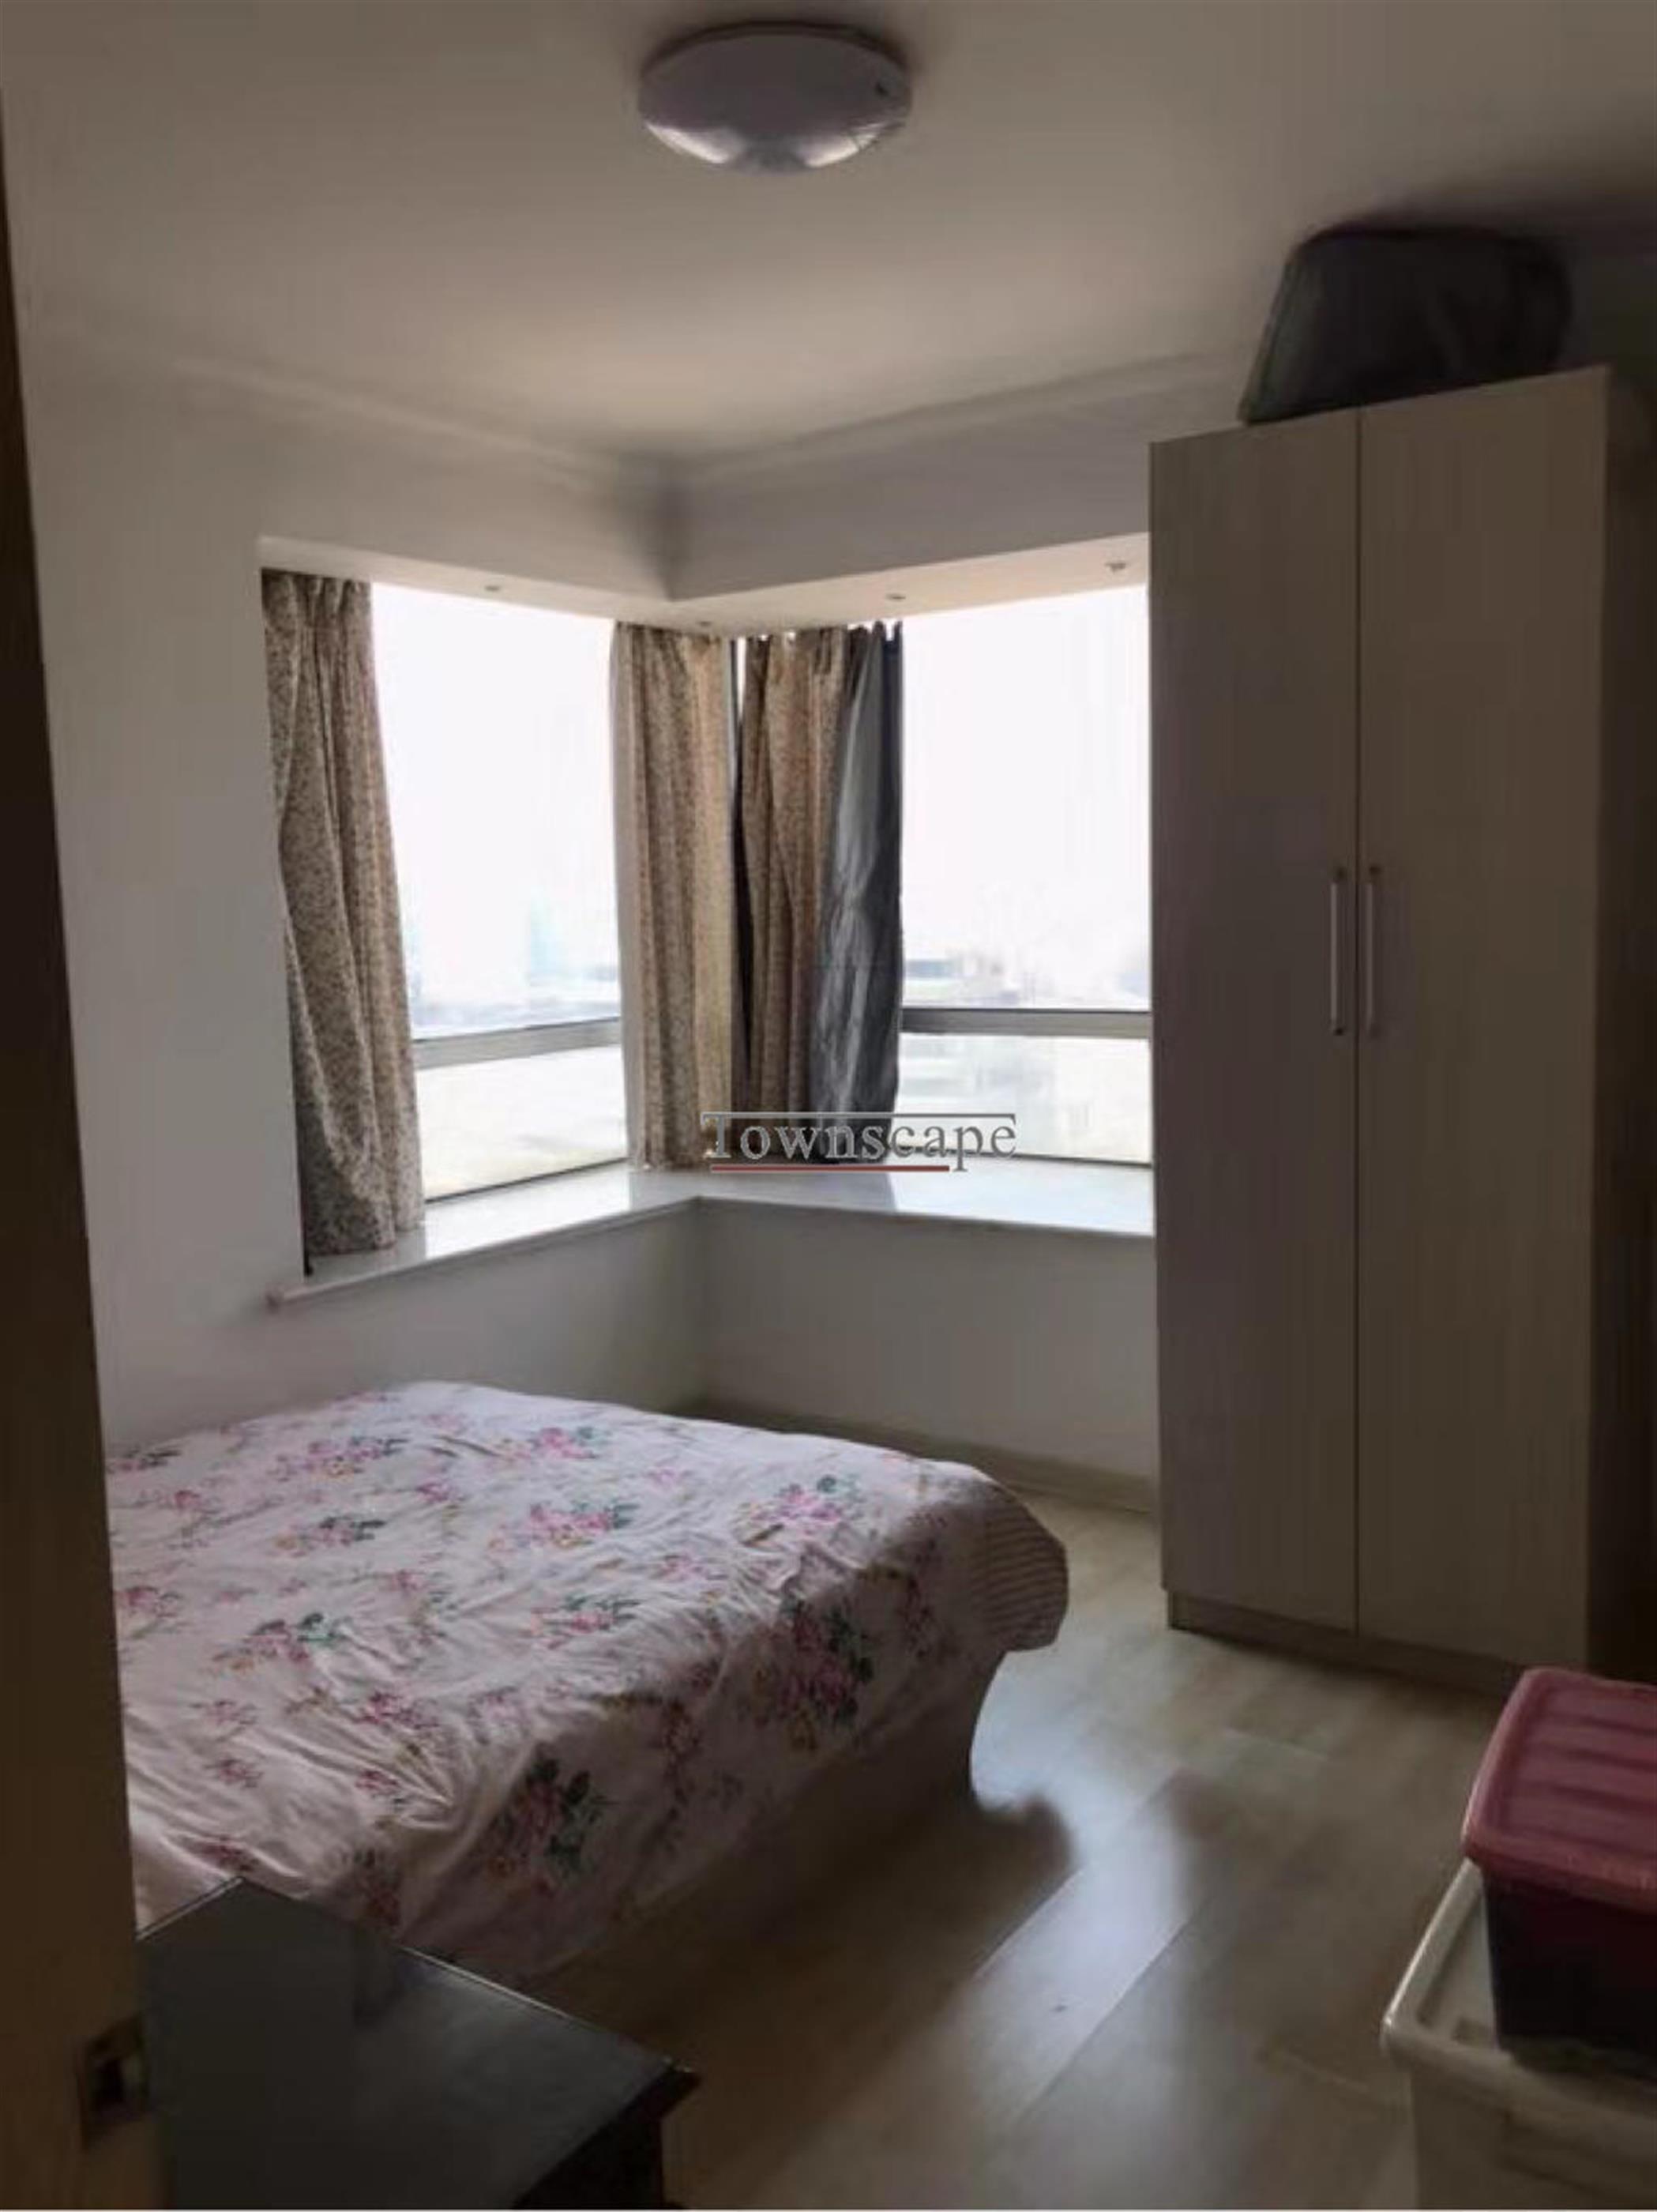 corner bedroom Great Value Spacious Bright 2BR Apartment Near LN 4/12 for Rent in Shanghai